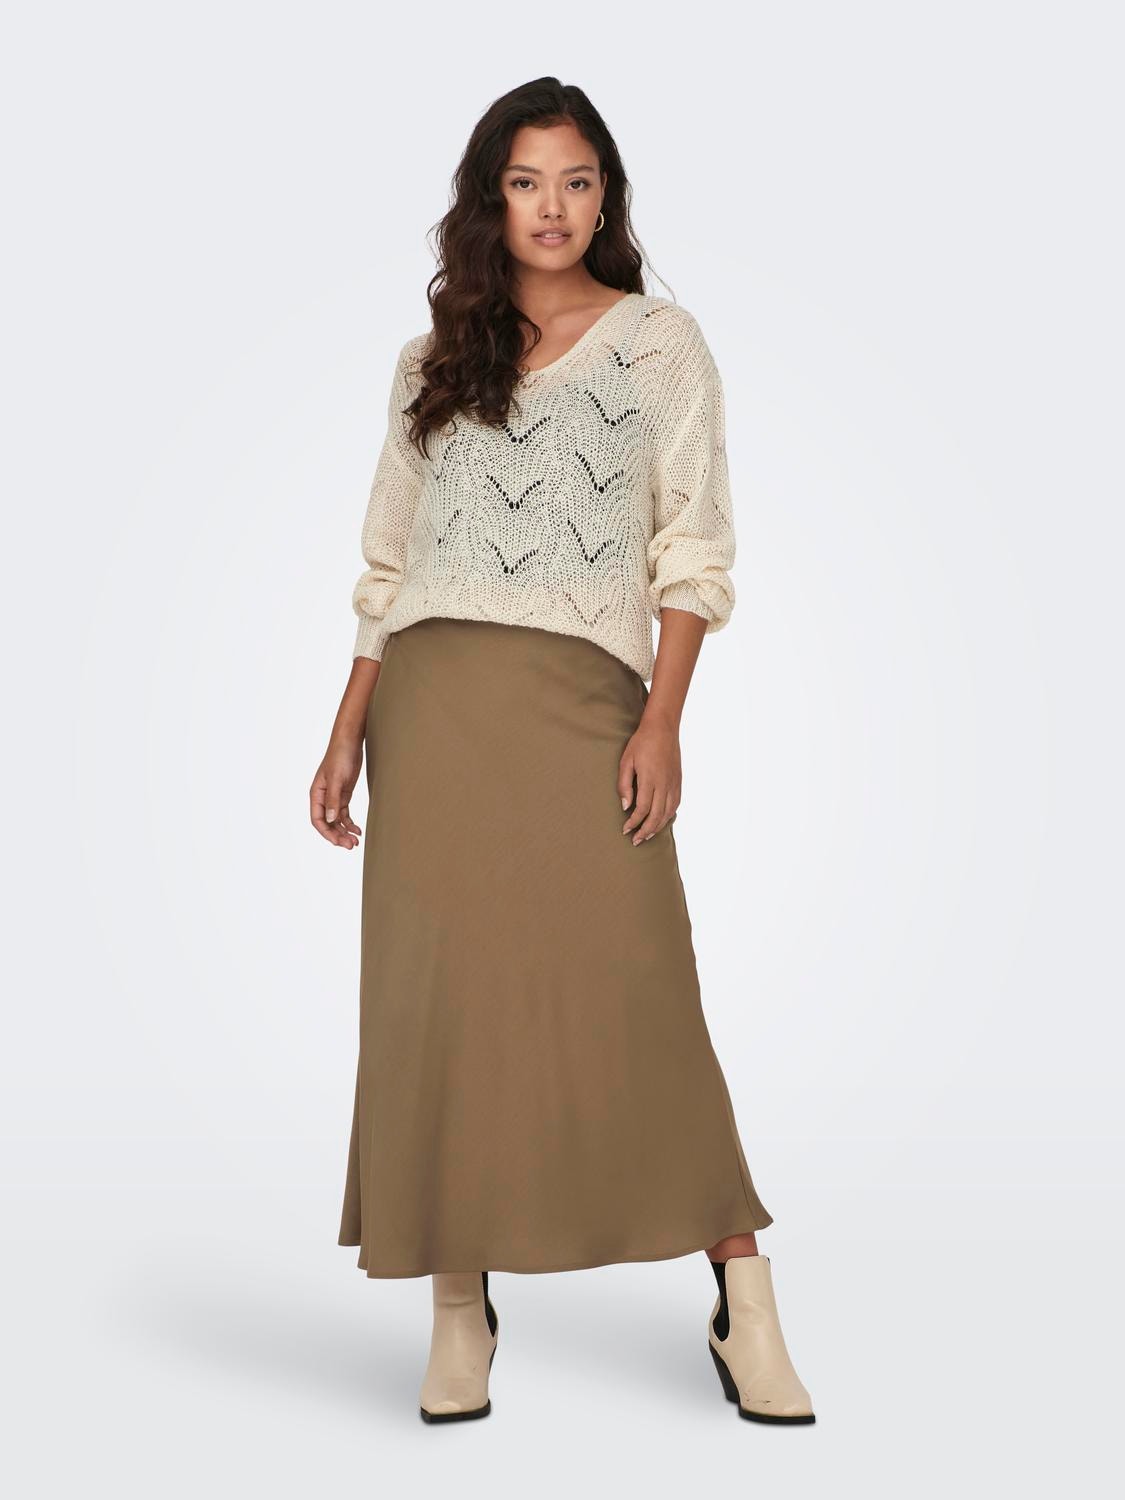 ONLY Midi skirt -Toasted Coconut - 15304905